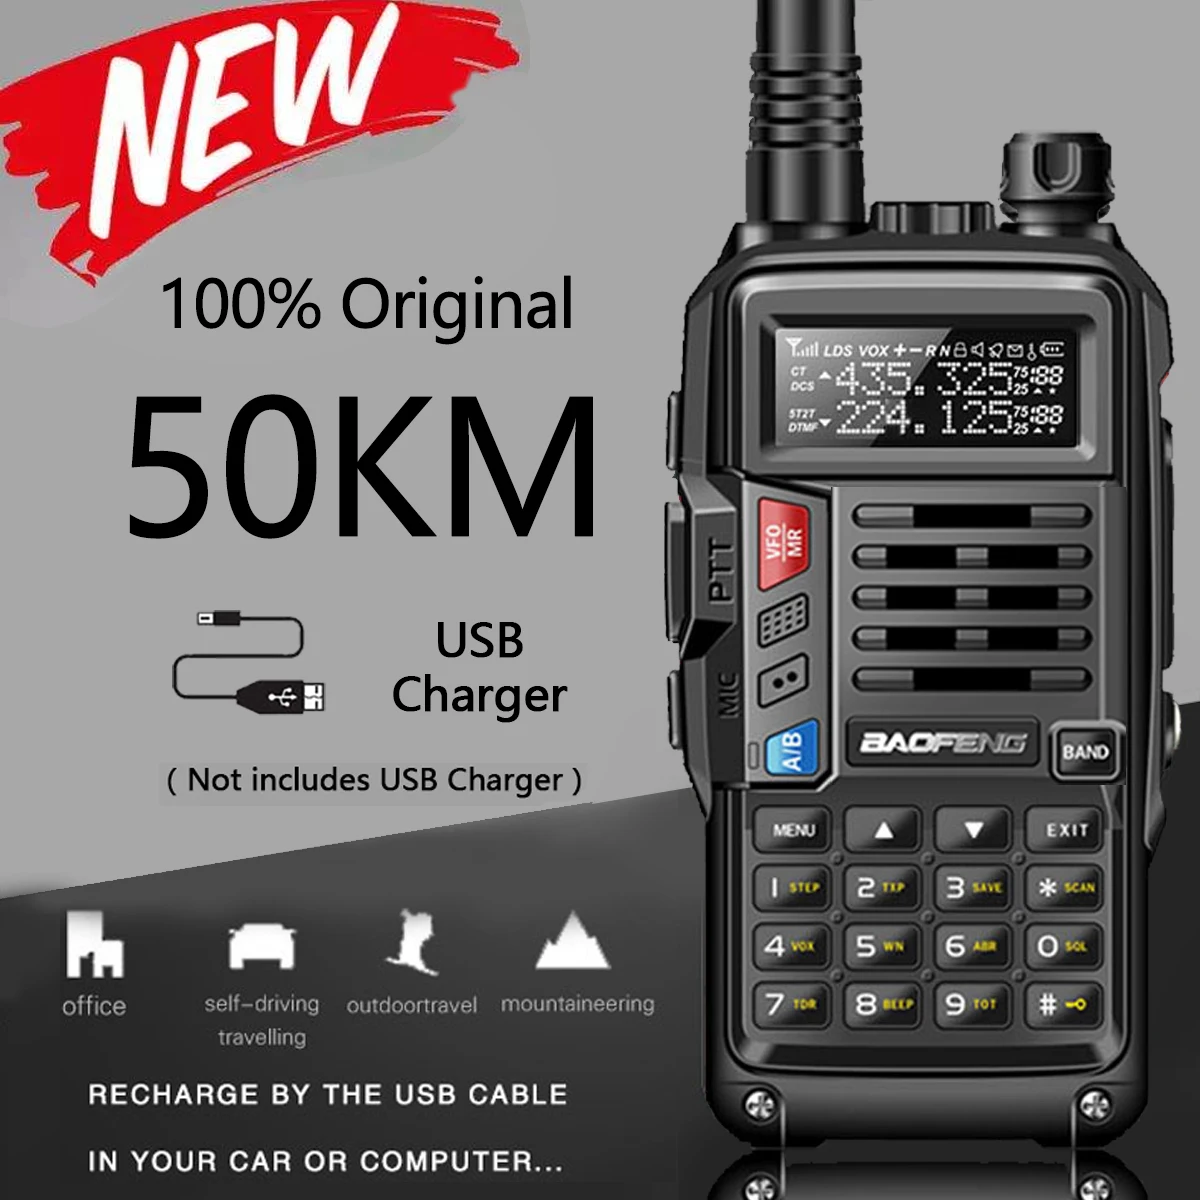 The Car Households Are Two -port USB2.4A Travel Ca BaoFeng UV-S9 Plus 8W/10W High Power Walkie Talkie Transceiver CB Radio 50km